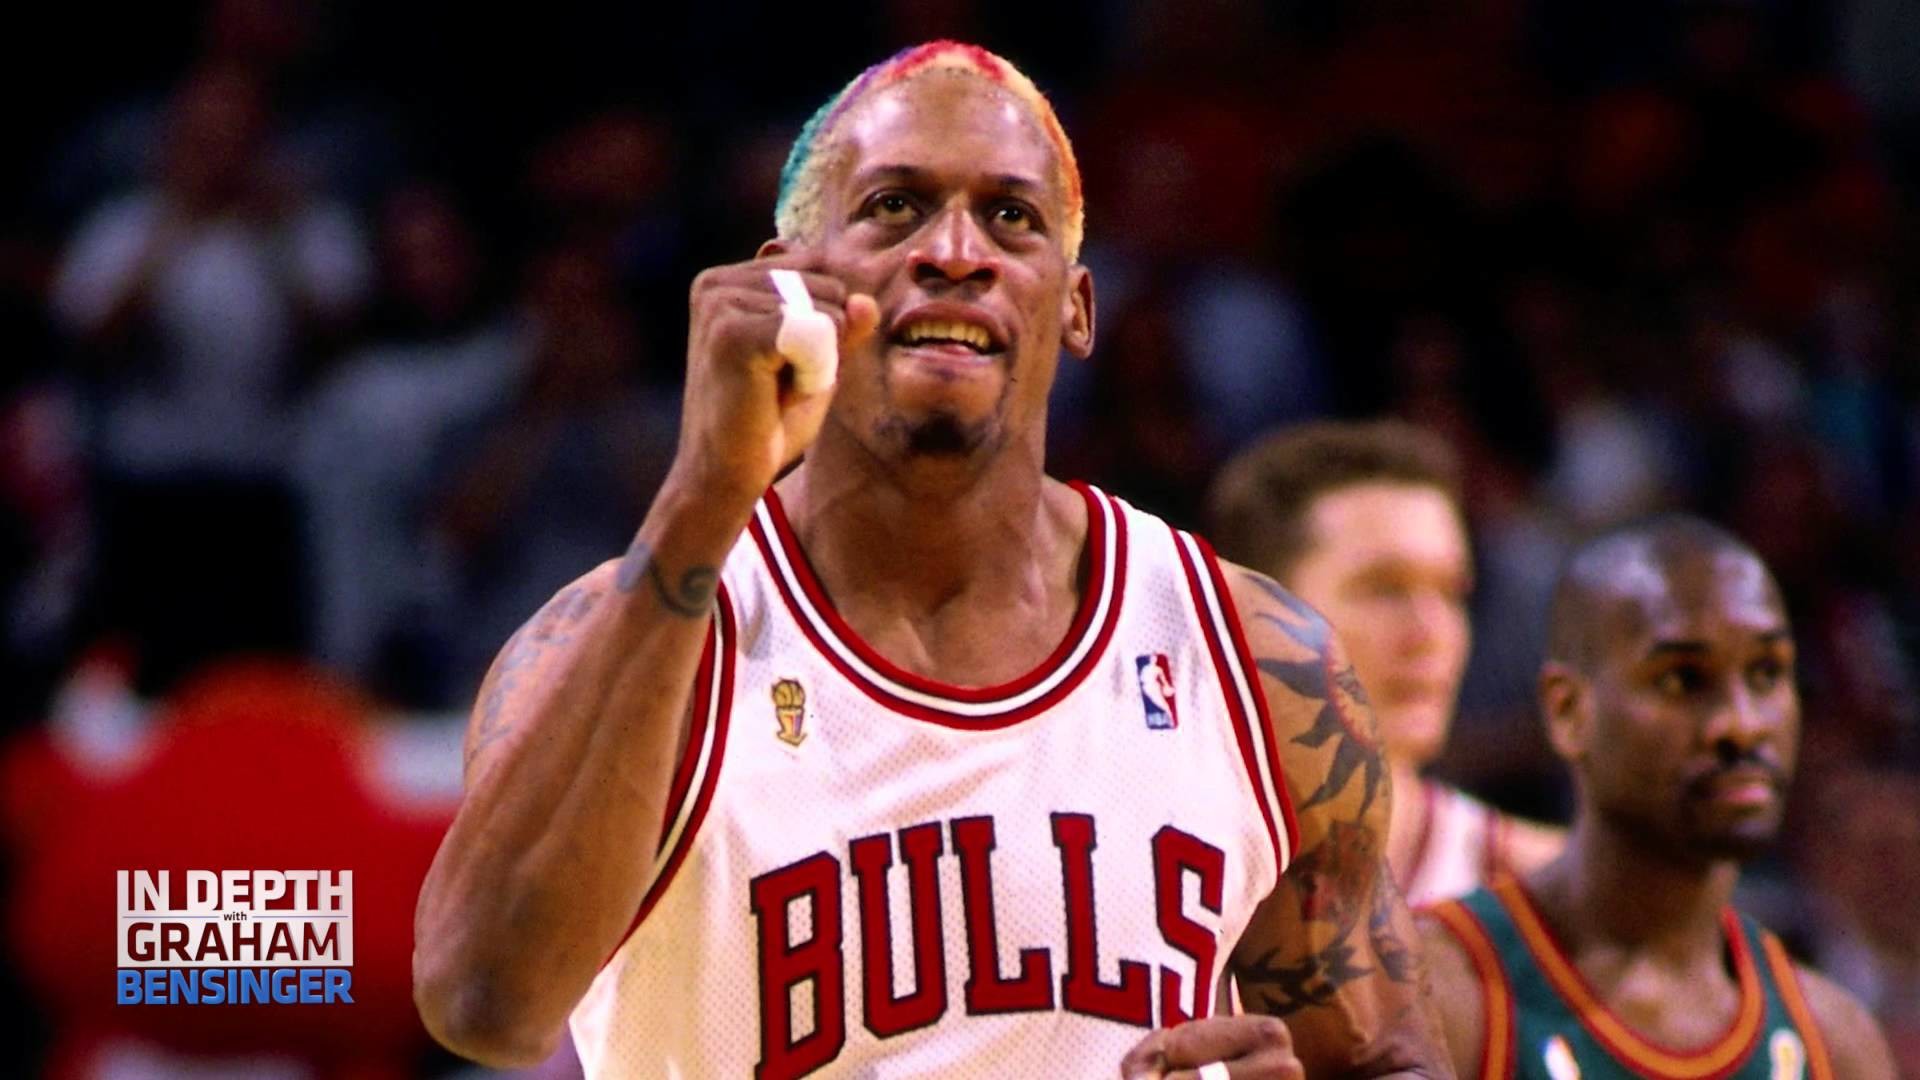 1920x1080 Dennis Rodman Wallpapers High Resolution and Quality Download